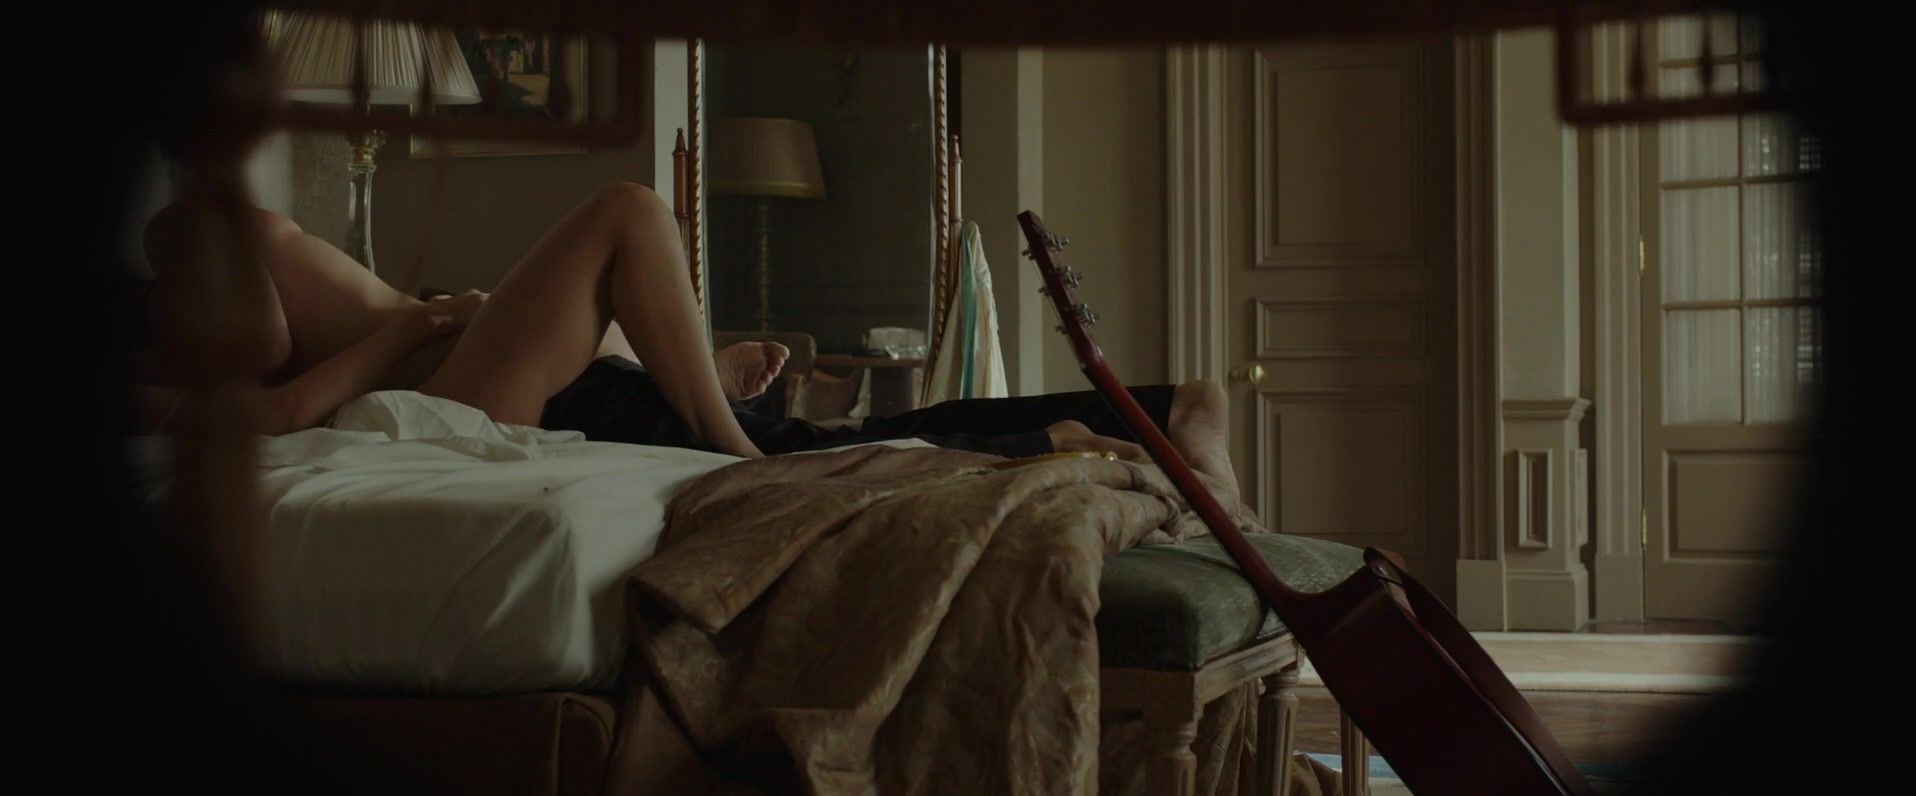 GoodVibes Hot scene with nude actress Melanie Laurent of the movie "By The Sea" Periscope - 1